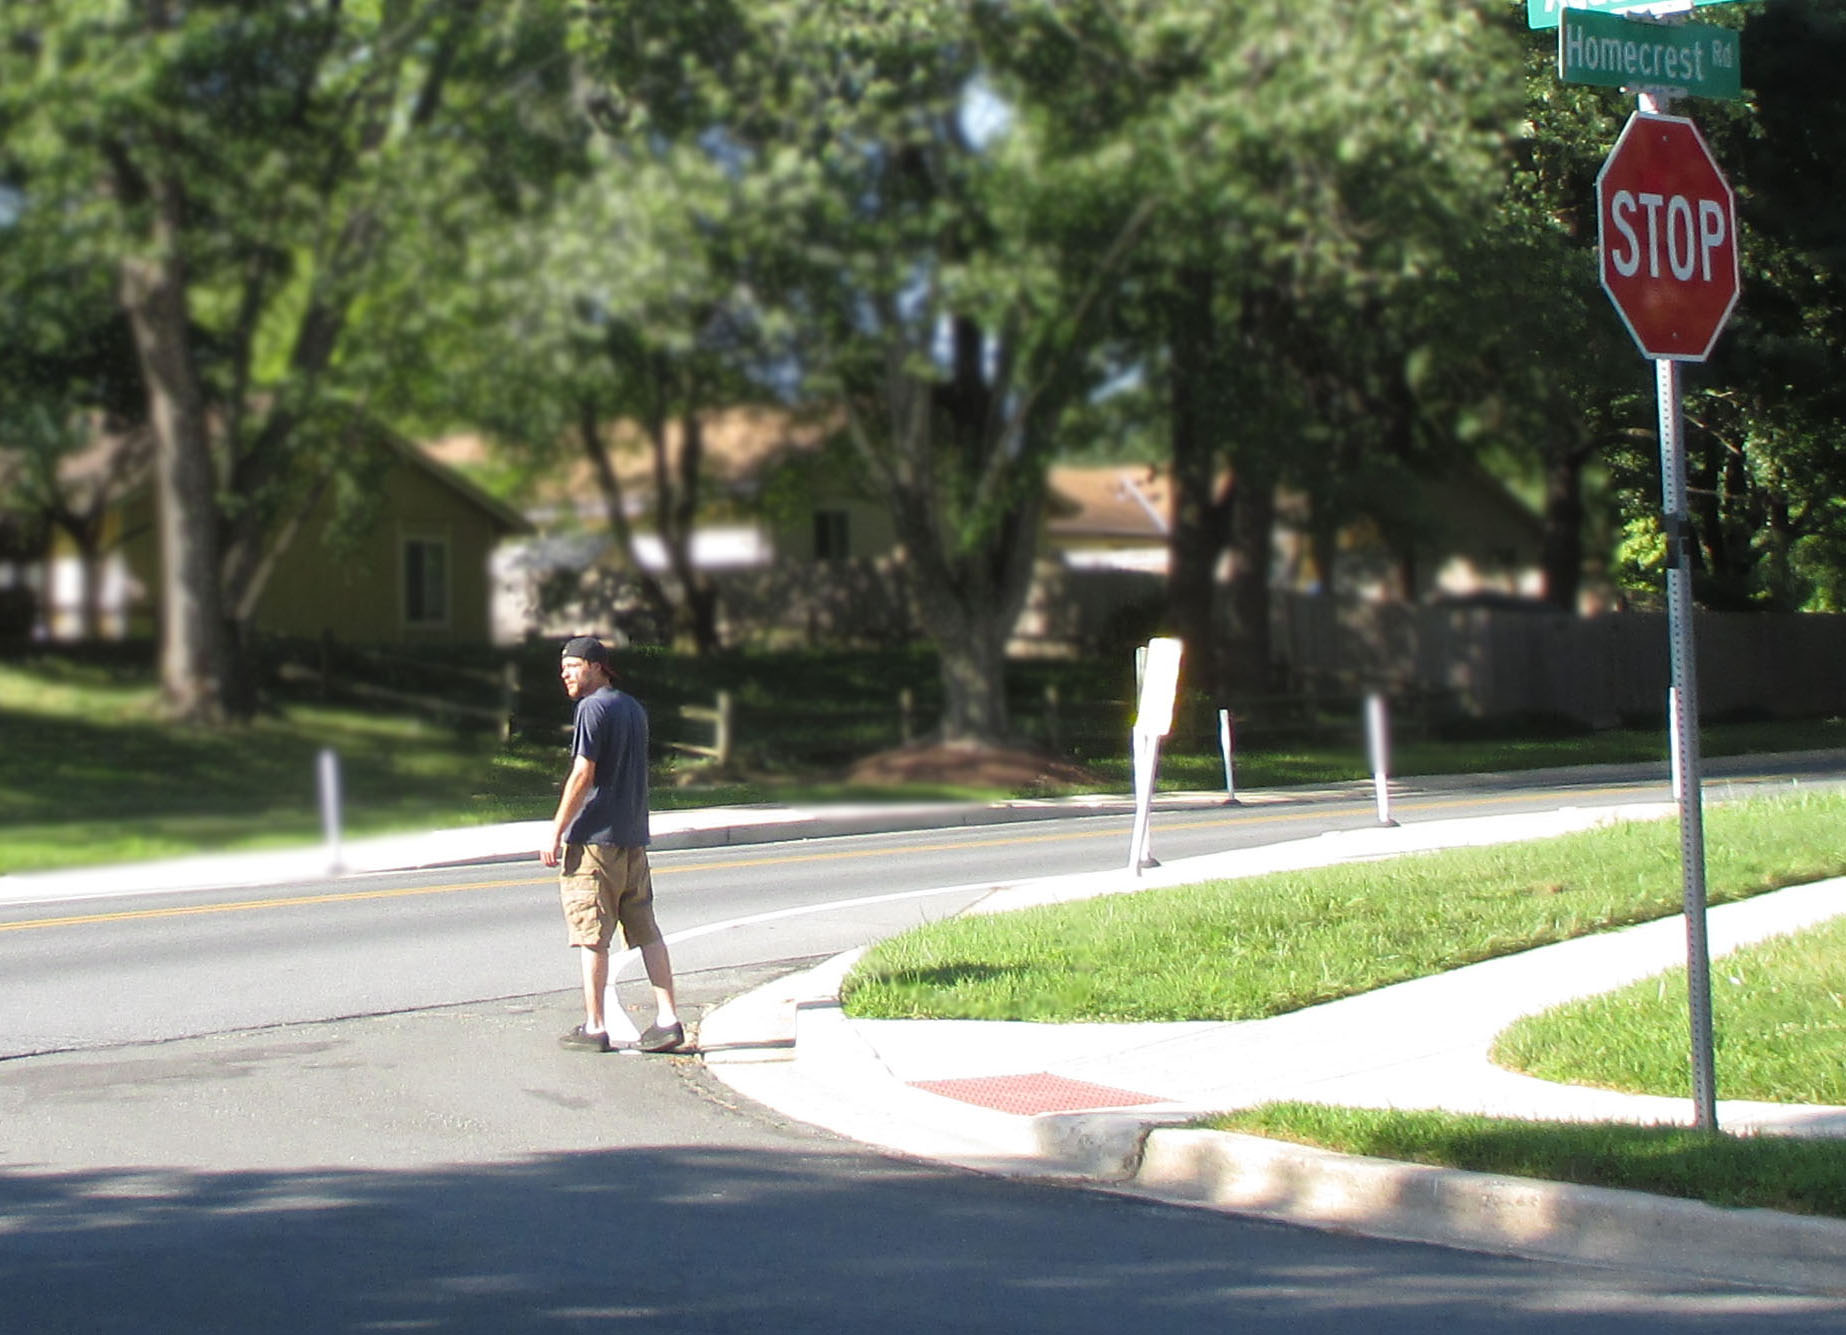 Photo shows a man starting to walk across a residential street from a corner.  We can see the stop sign for the street beside him.